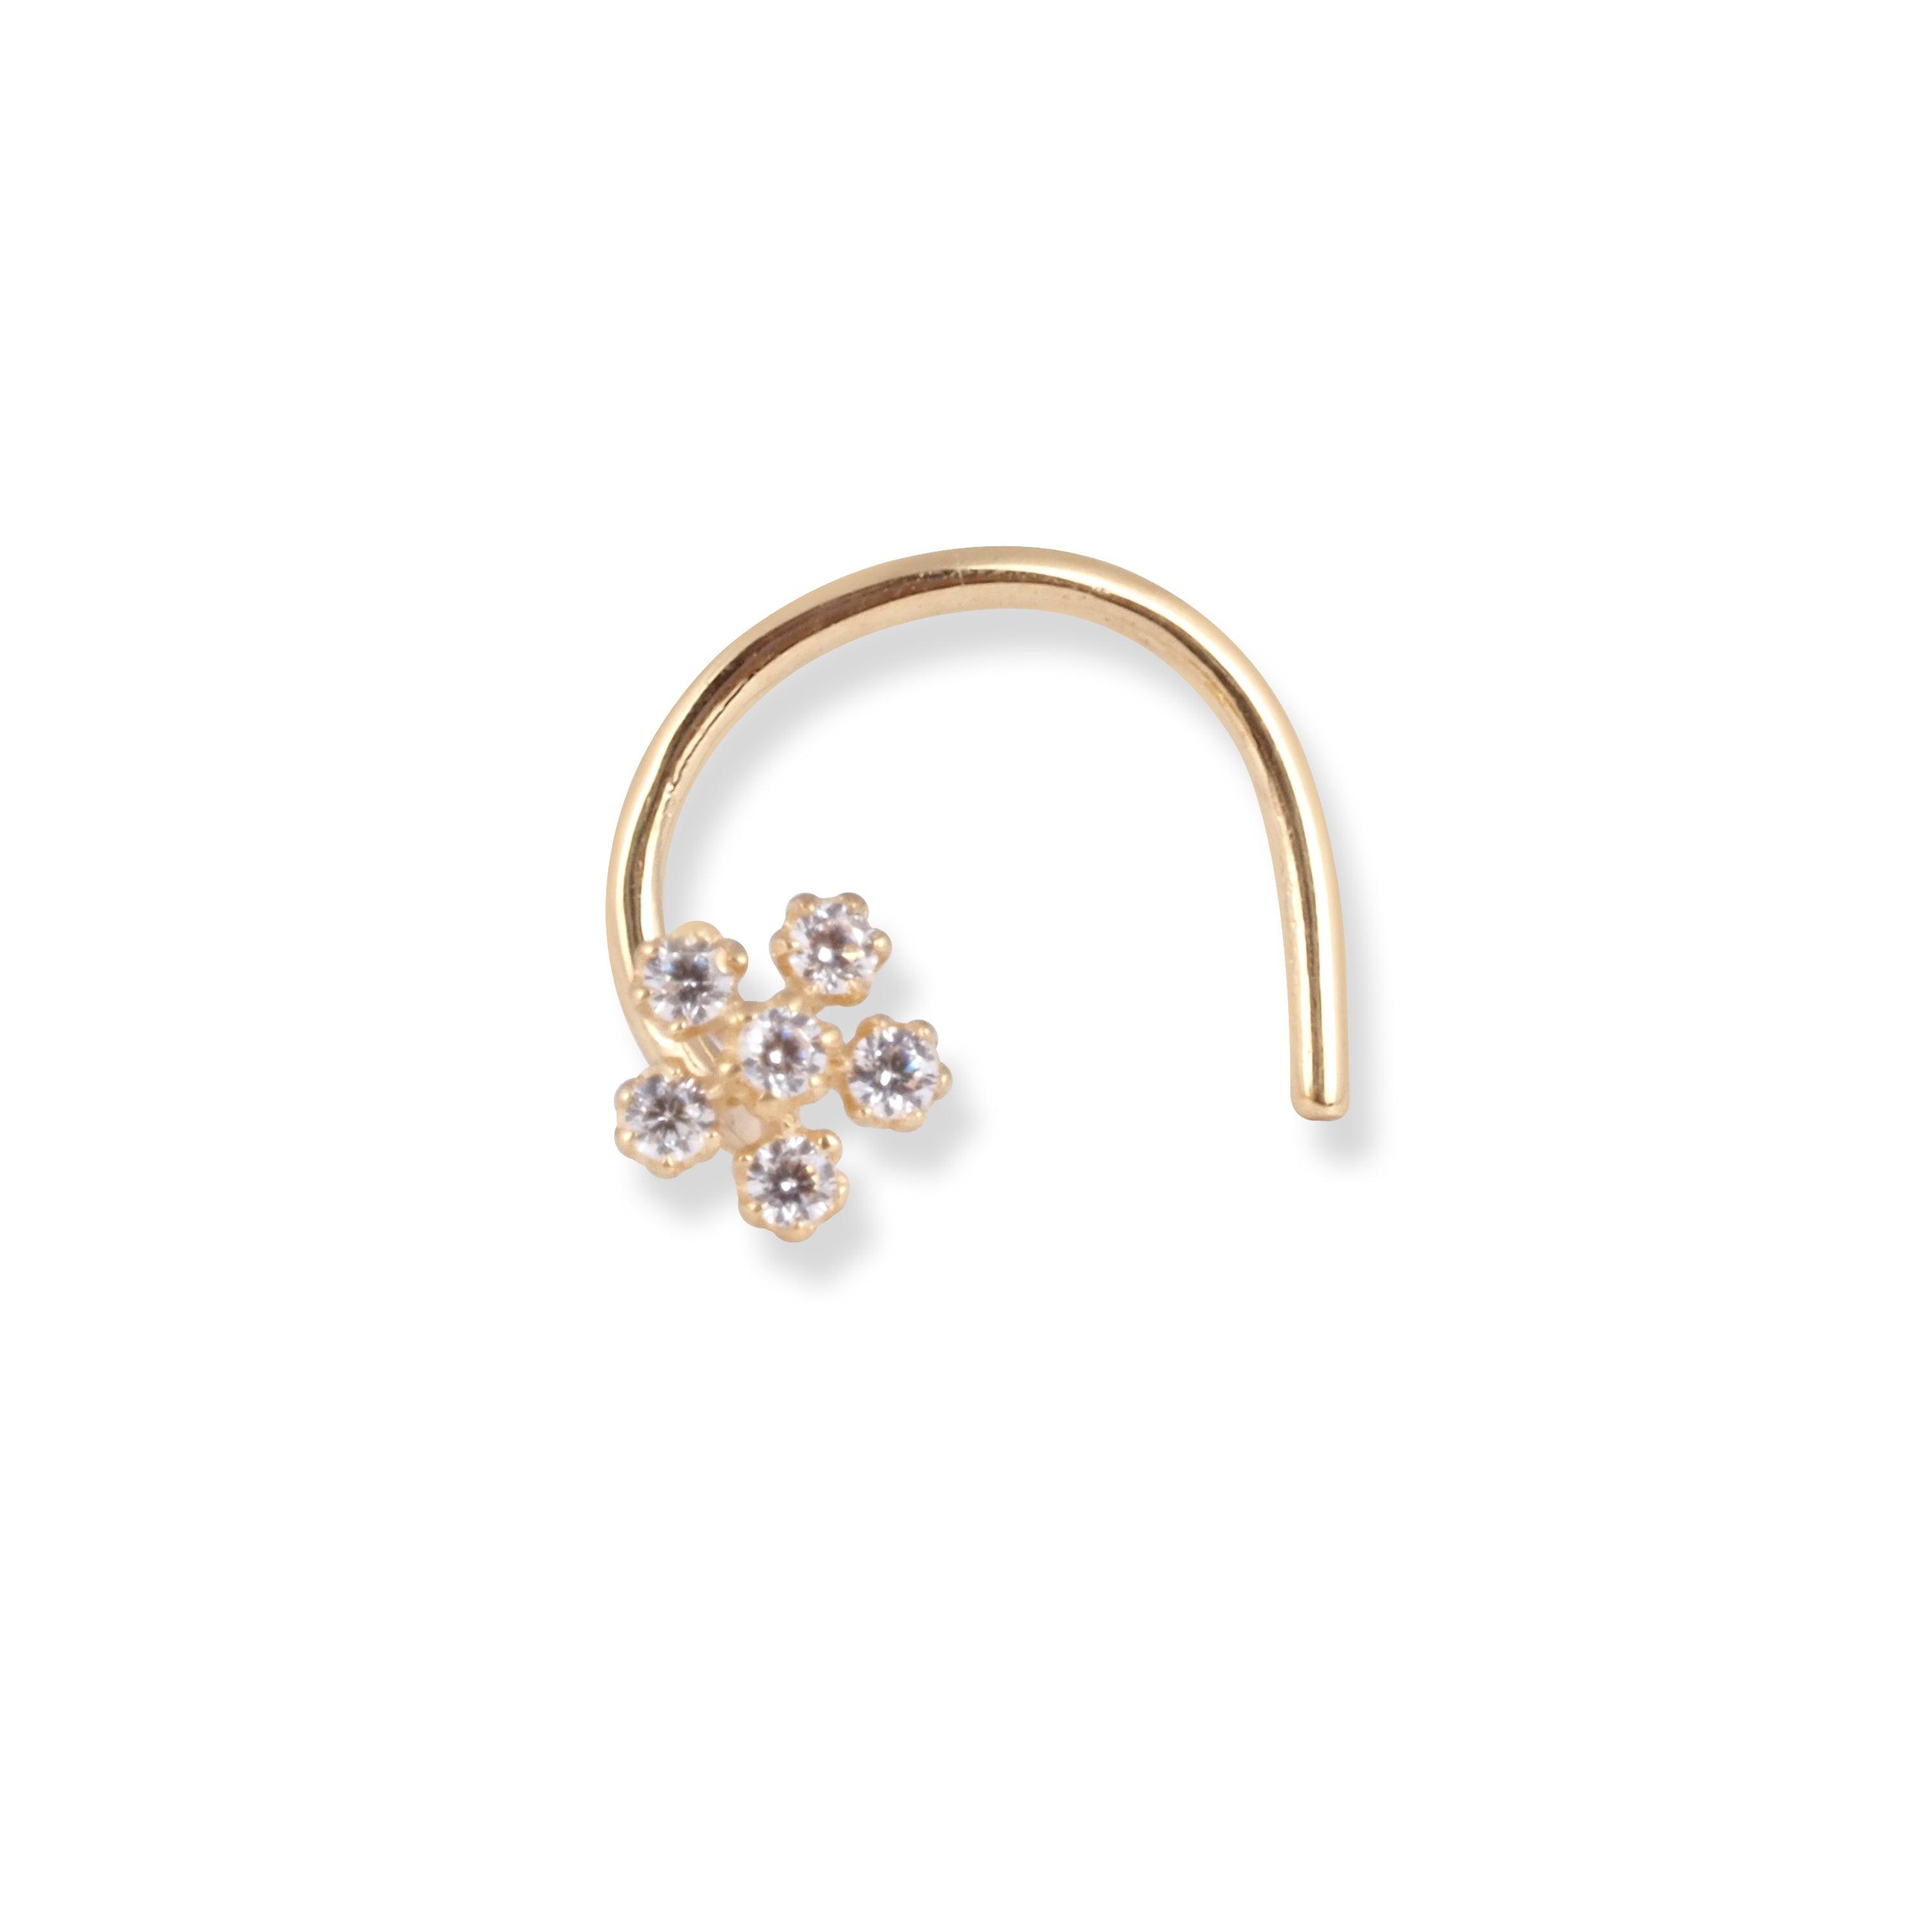 18ct Yellow Gold Flower Design Wire Back Nose Stud with 6 White Cubic Zirconia Stones NS-7572 - Minar Jewellers